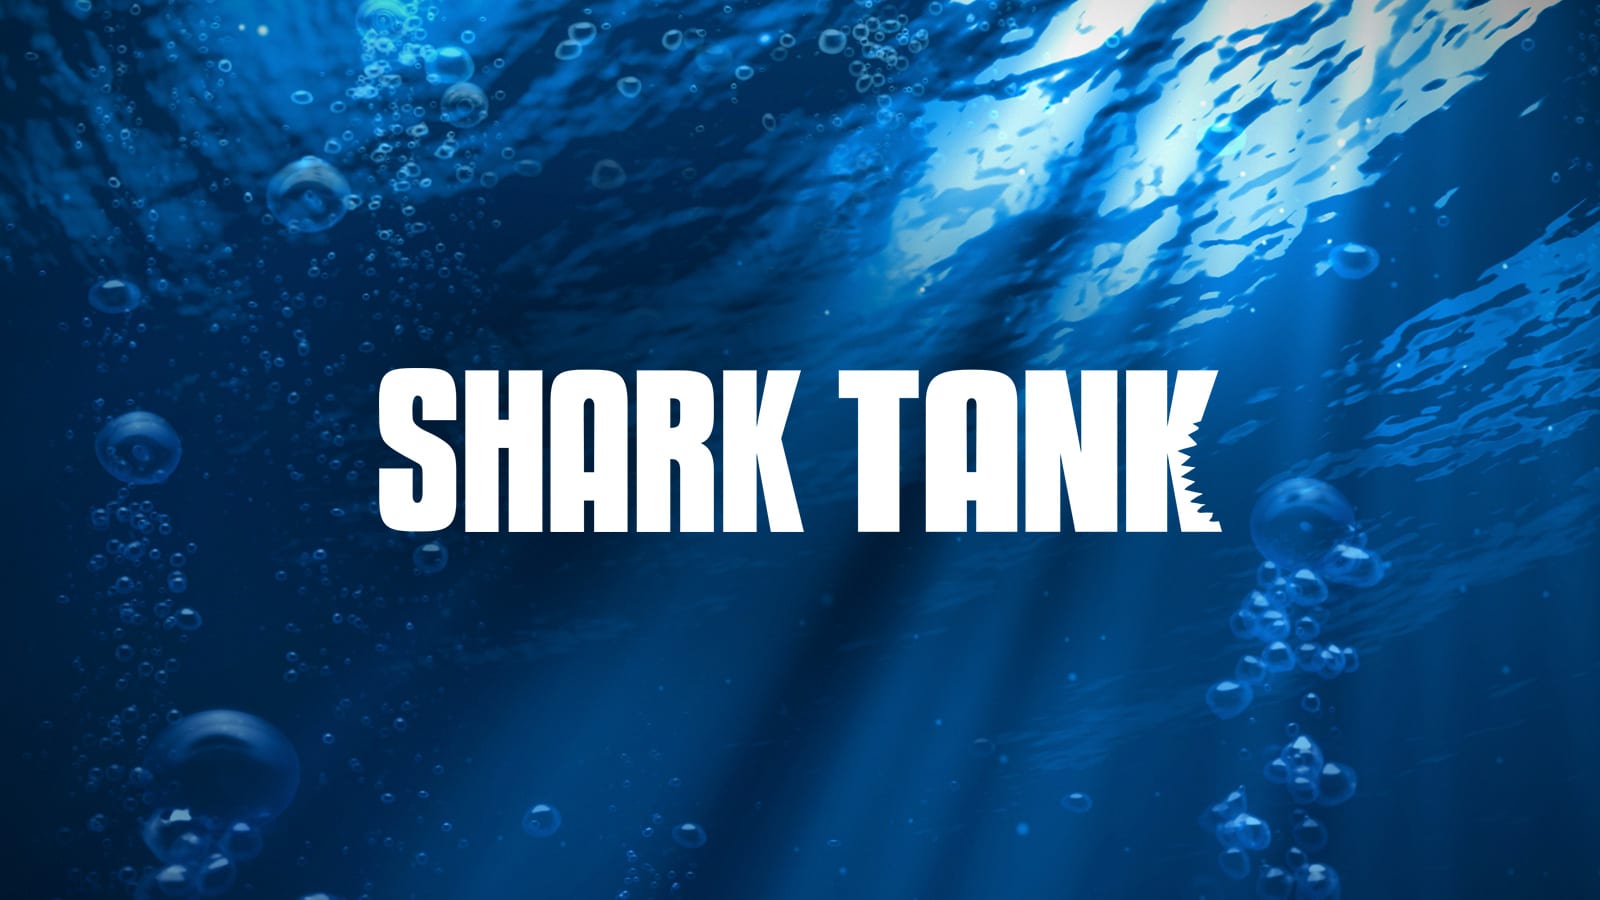 Top 5 Moments When Entrepreneurs Sold Their Entire Company in Shark Tank 